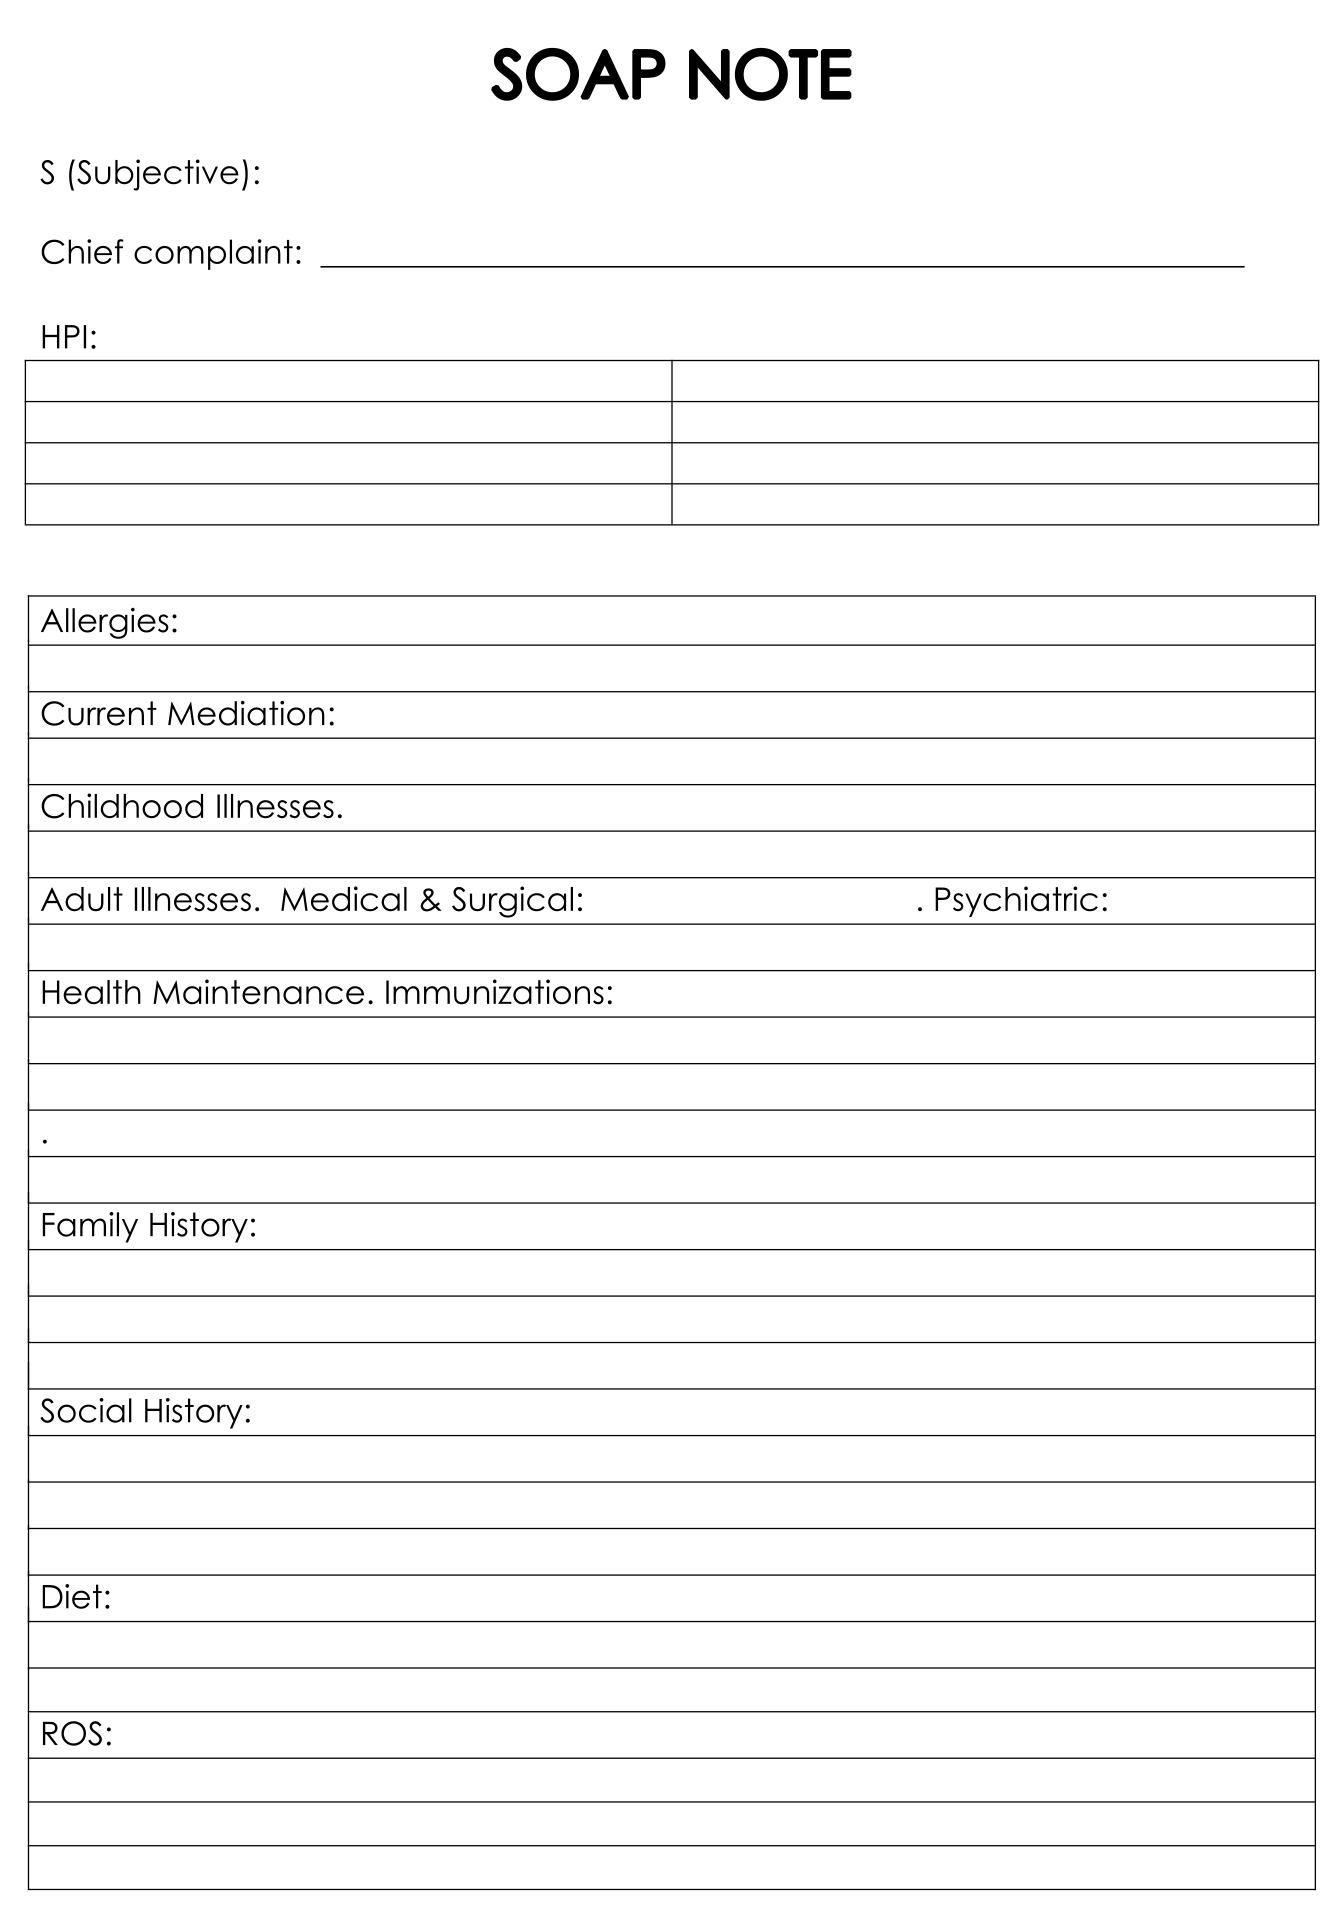 22 Best Printable Counseling Soap Note Templates - printablee.com Regarding Soap Report Template